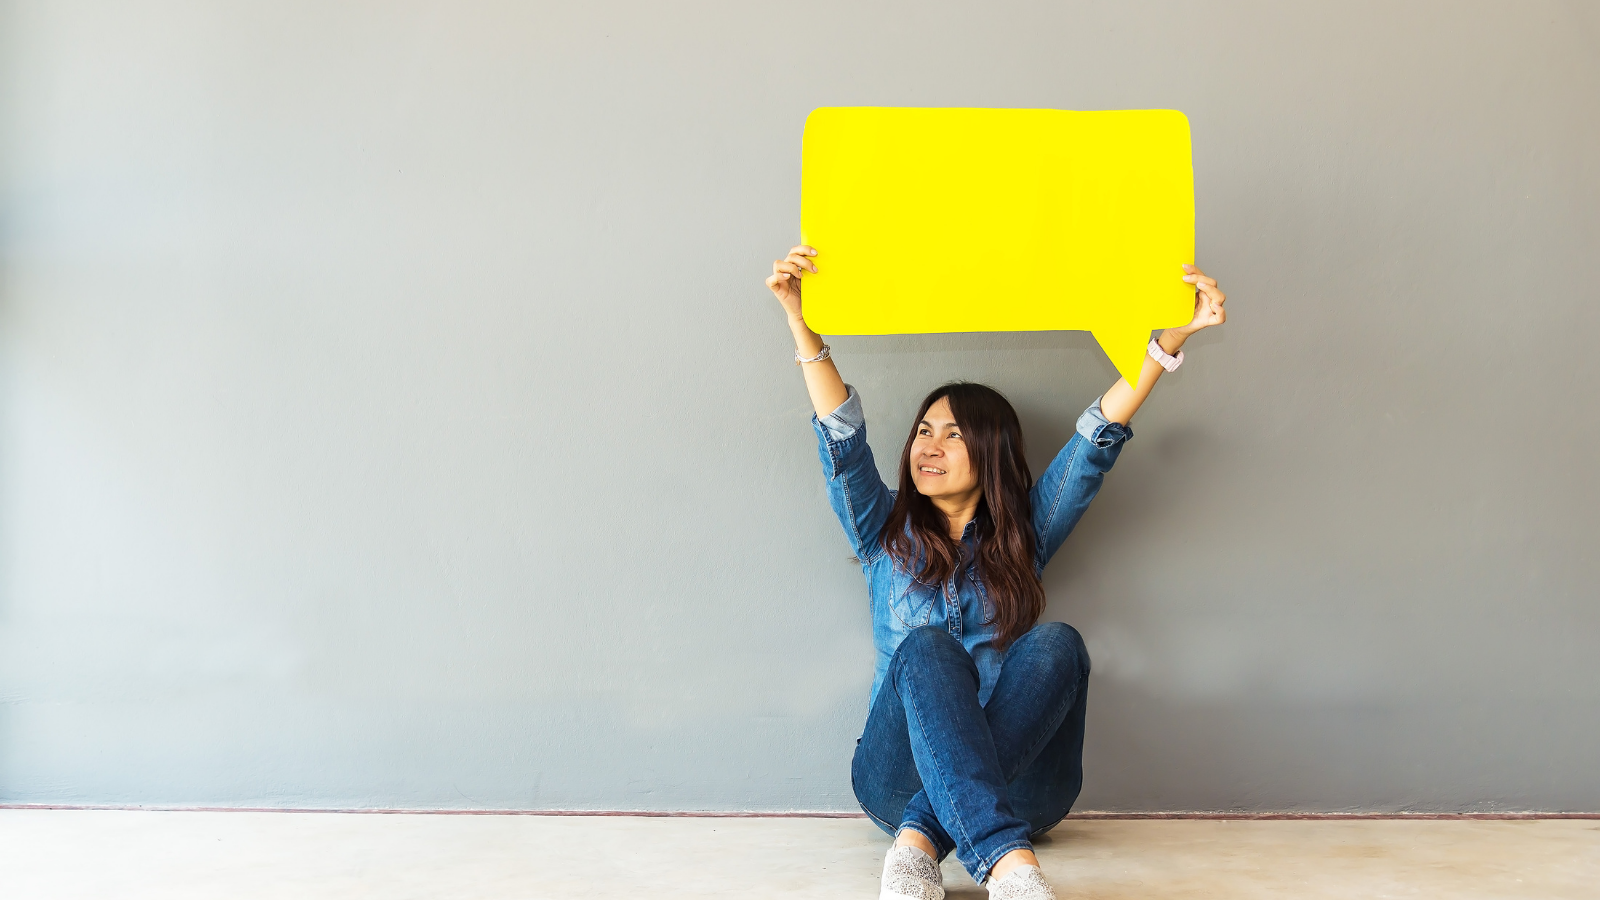 Image of a girl sitting on the floor holding up a yellow speech bubble